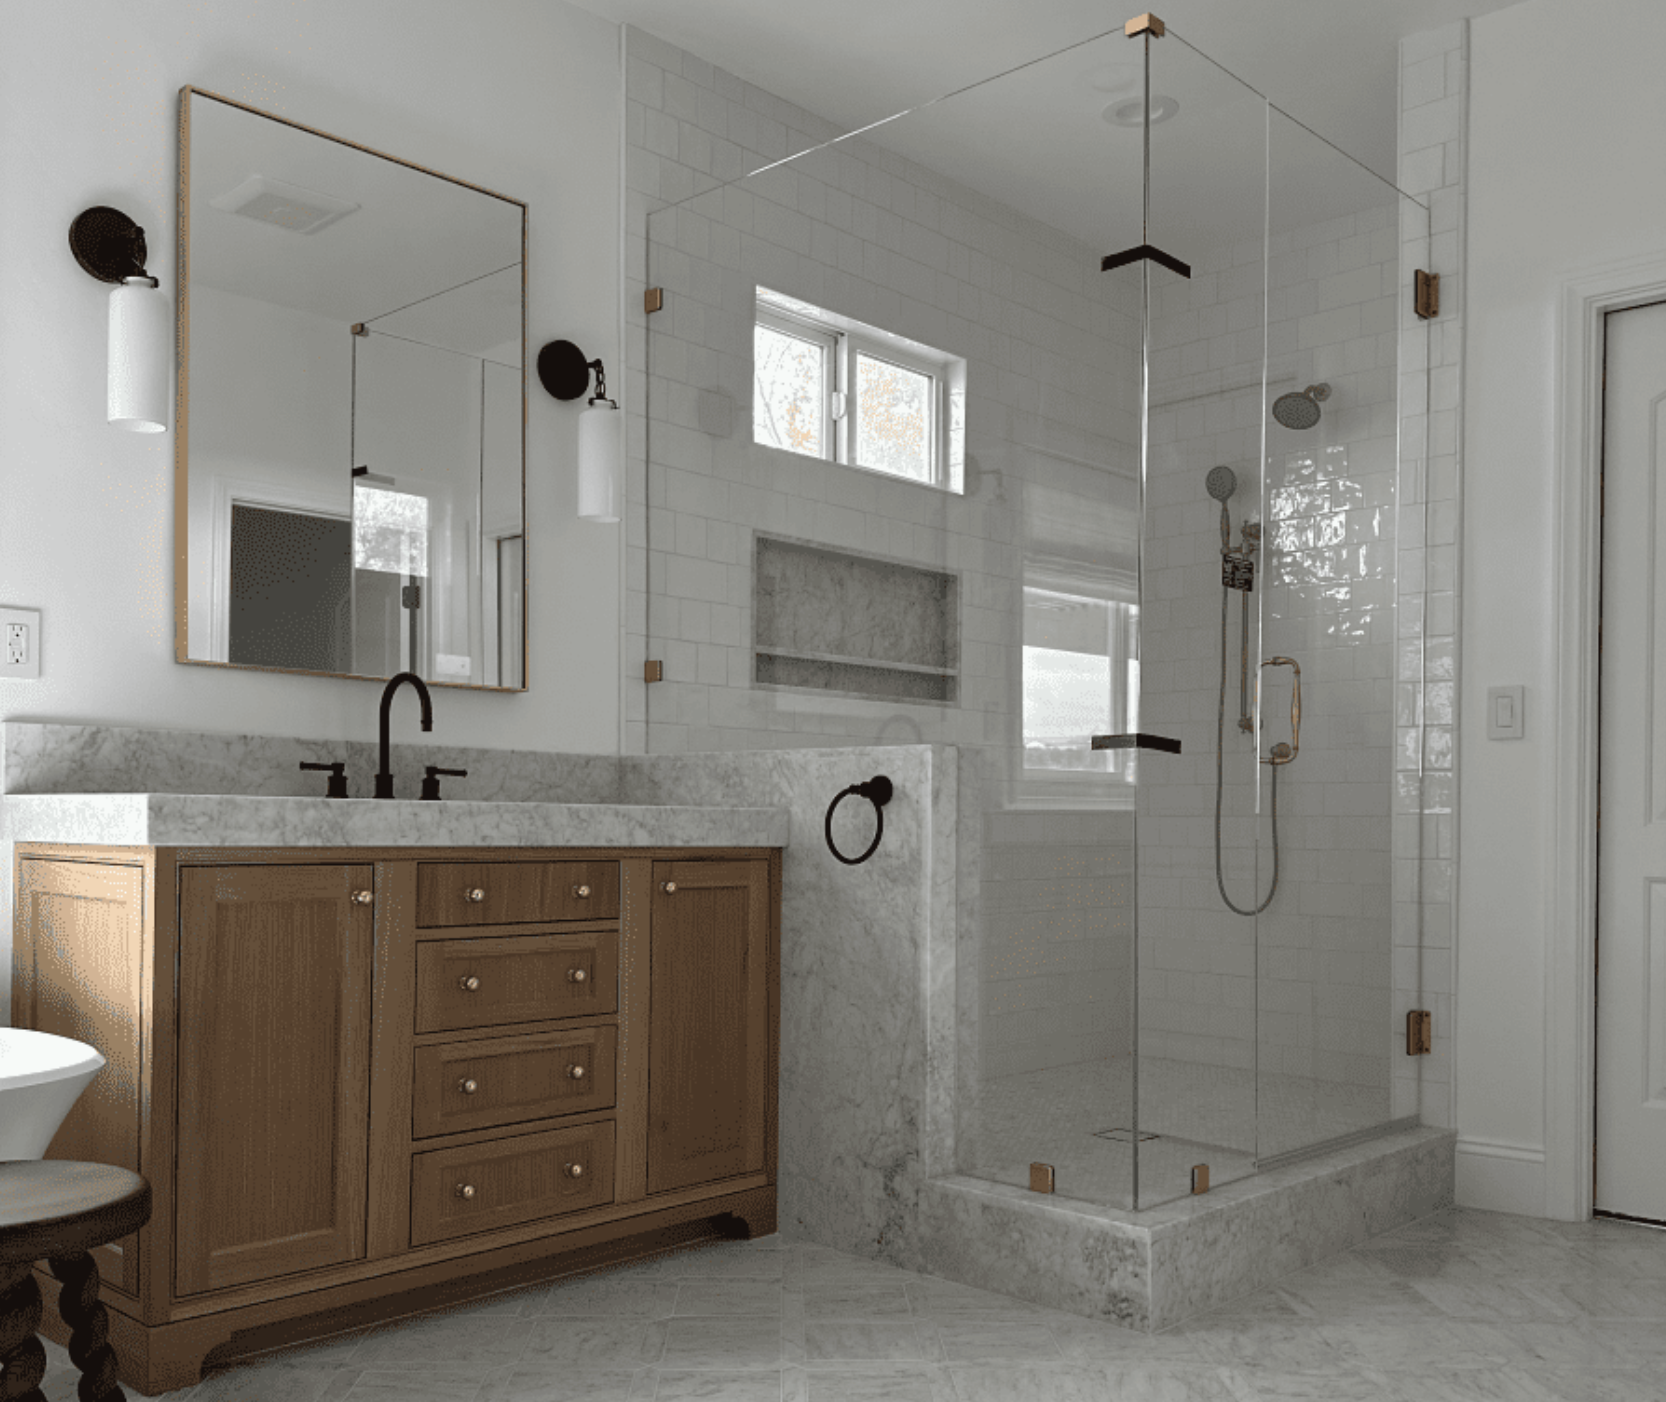 A bathroom with two sinks , a walk in shower and a large mirror.